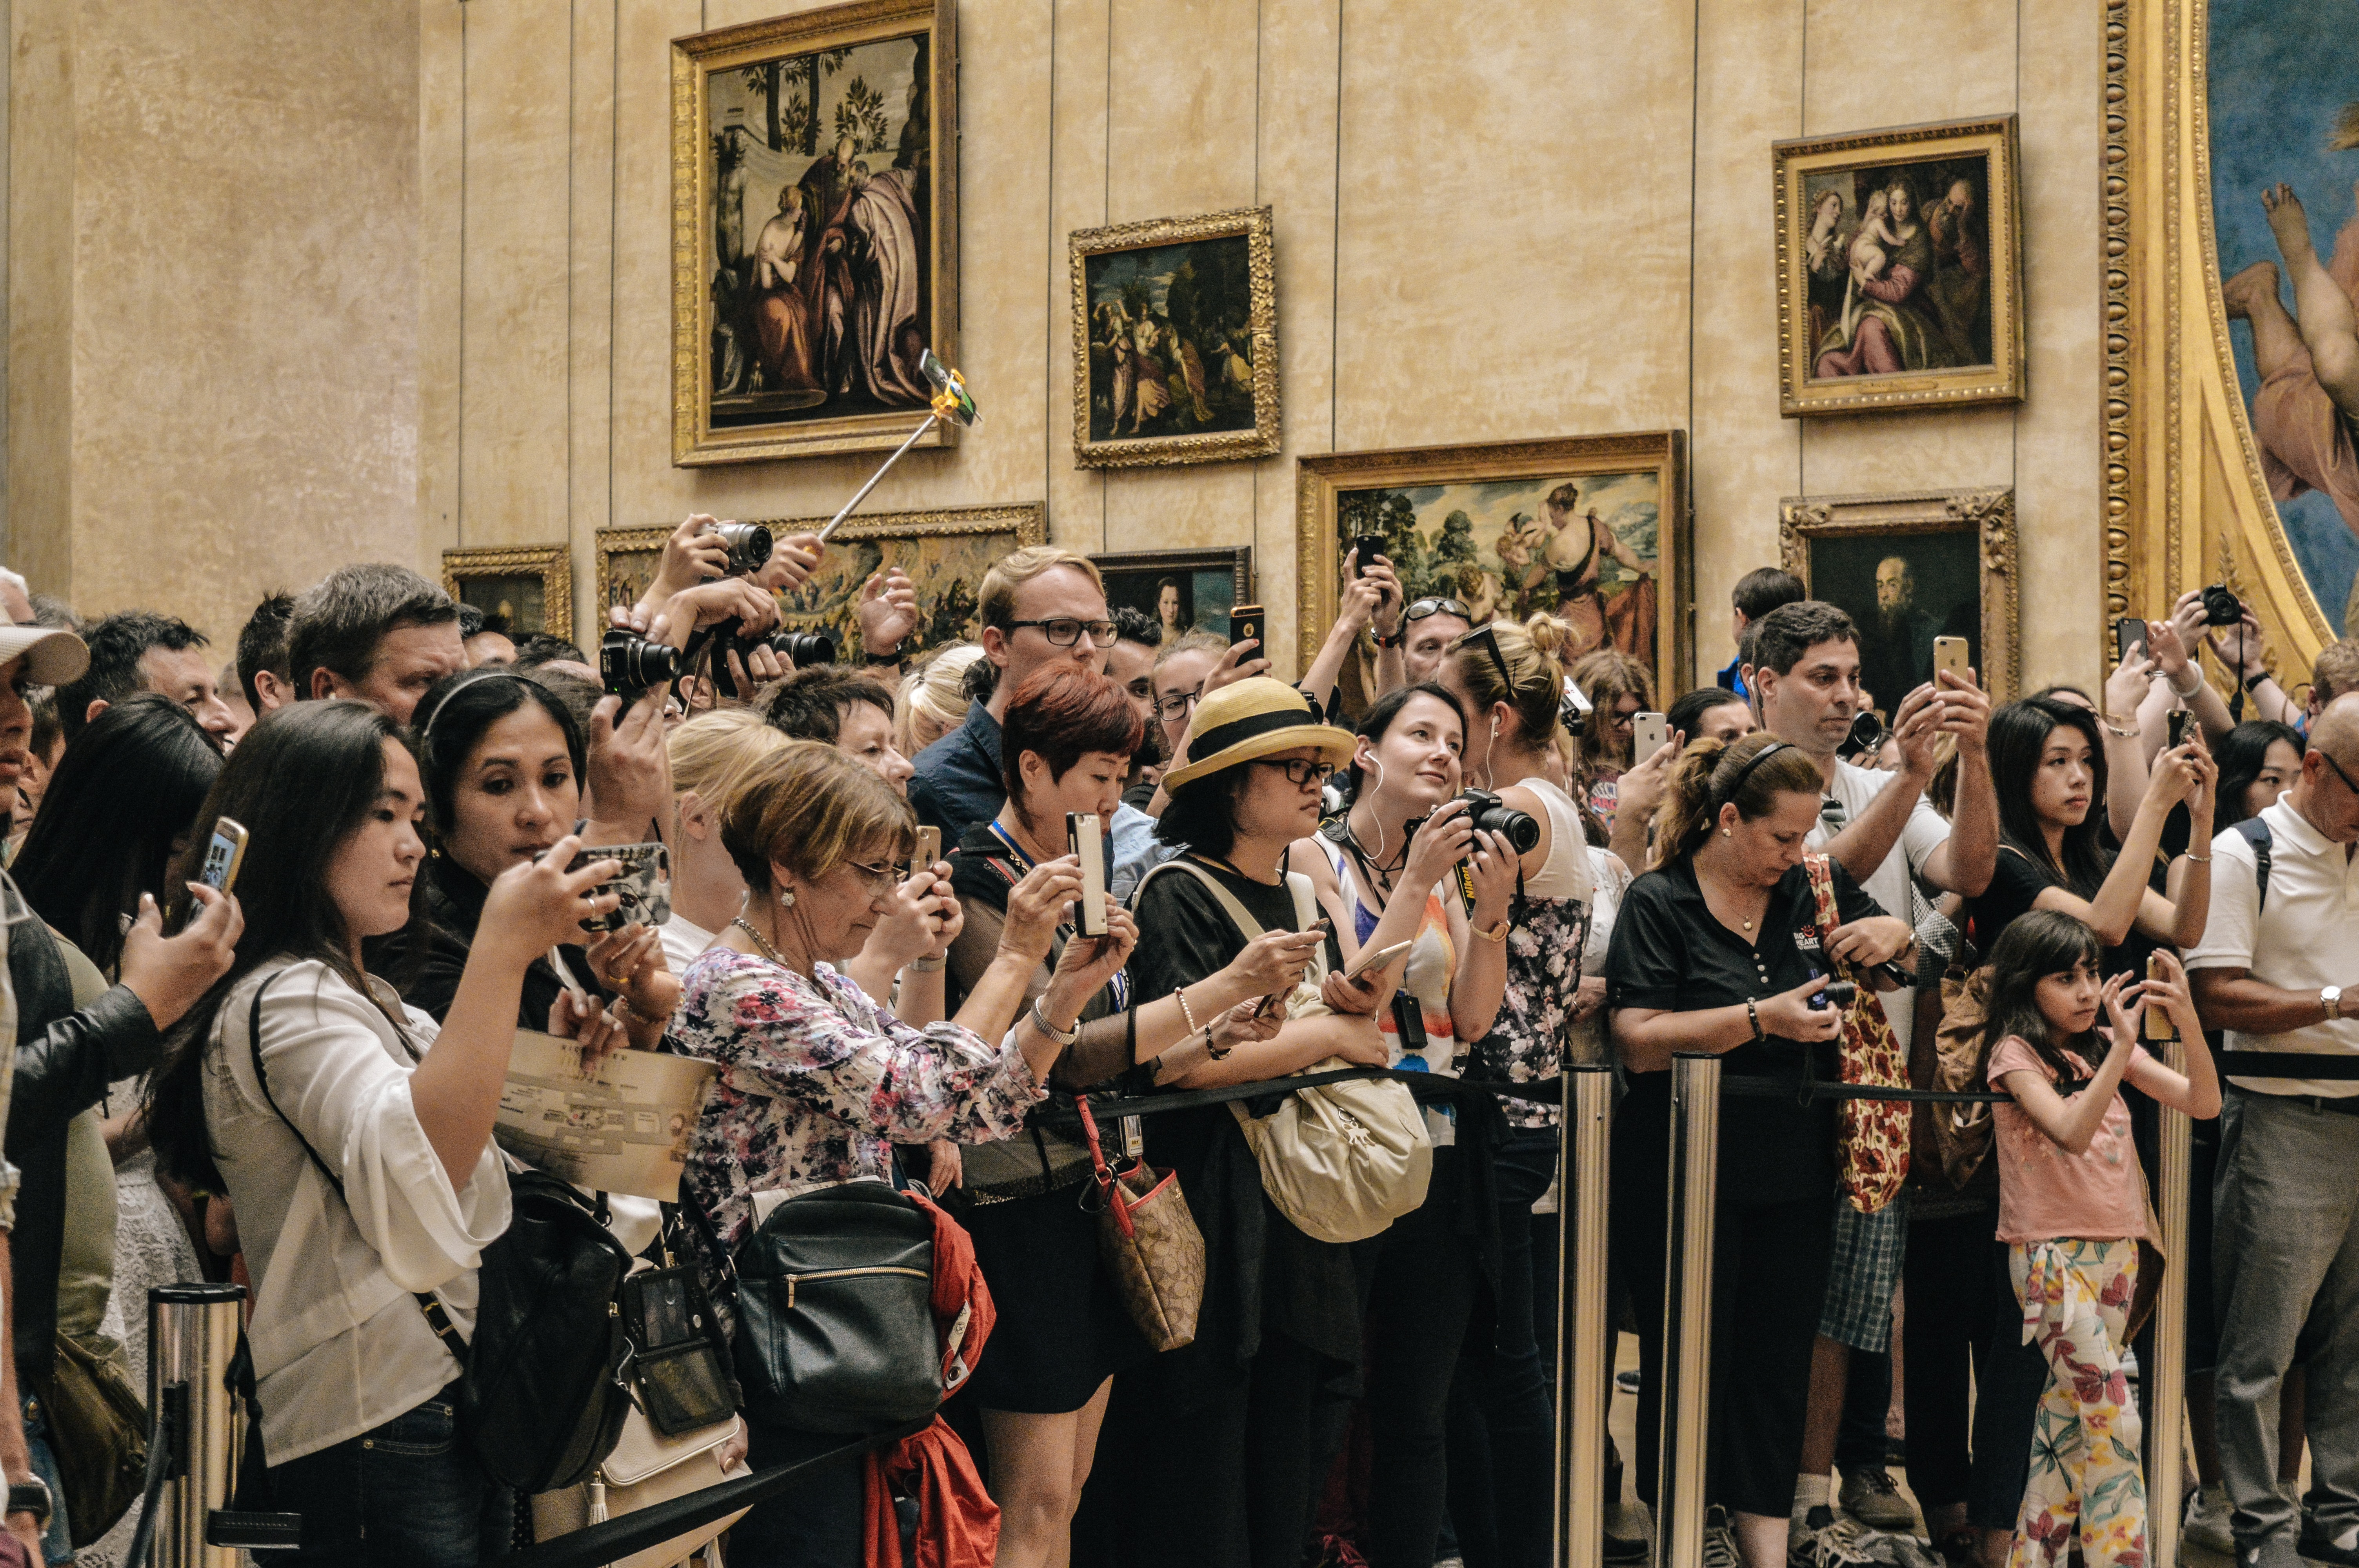 Crowds at The Louvre